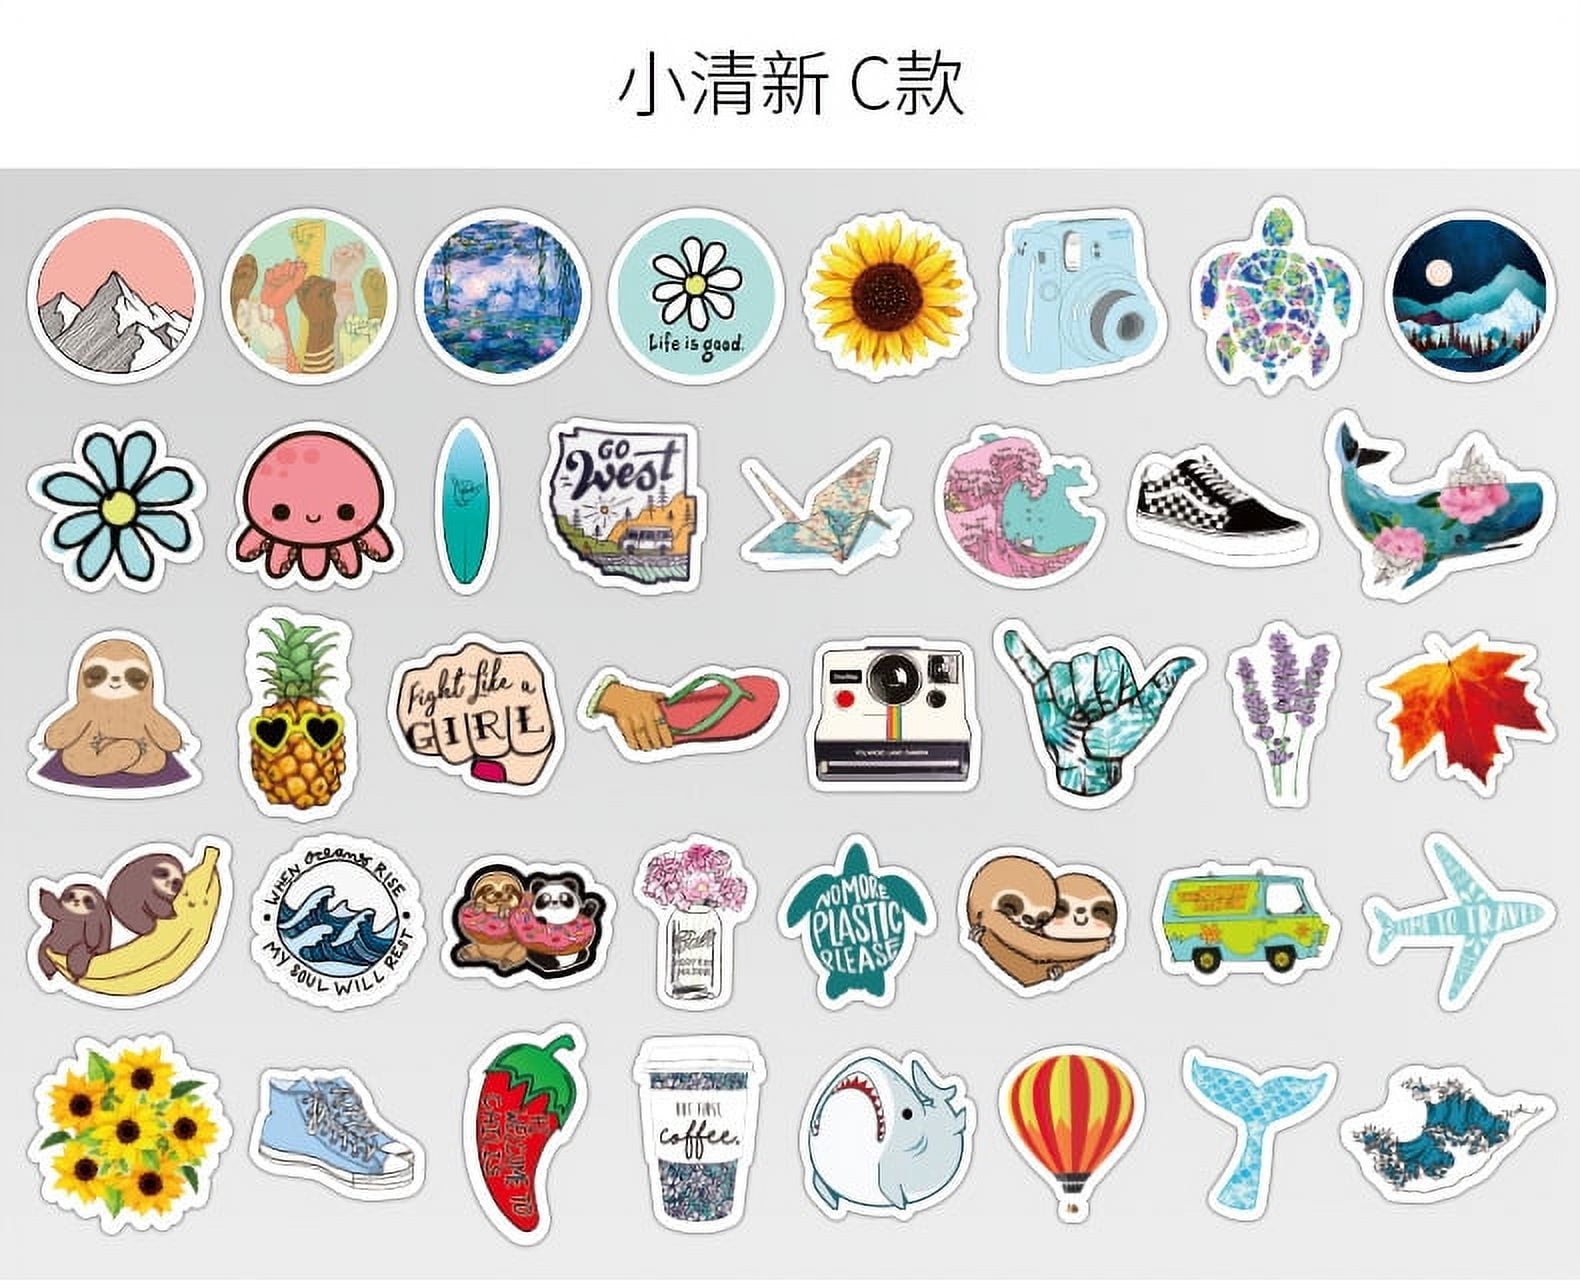 160 PCS Stickers Pack , Colorful VSCO Waterproof Stickers, Cute Aesthetic  Stickers. Laptop, Water Bottle, Phone, Skateboard Stickers for Teens Girls